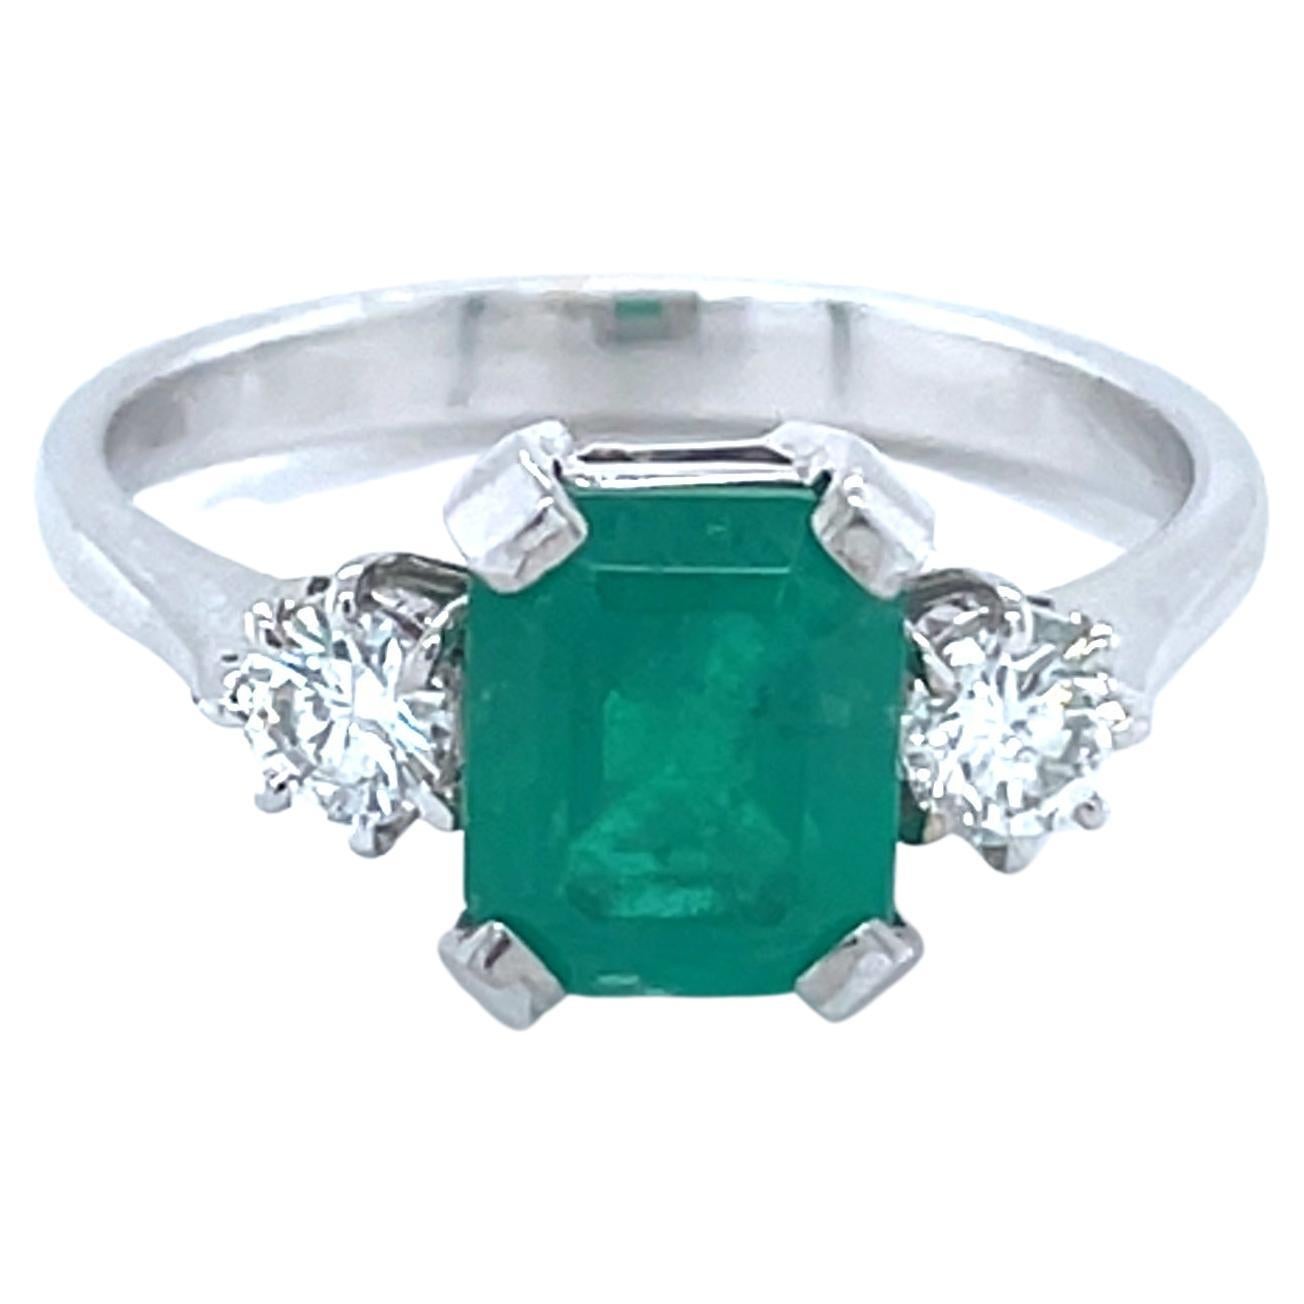 This 18K white gold classy ring is from our Timeless Collection. It is made of a cushion shape emerald 1.51 Carat decorated by 2 colourless round diamonds in total of 0.32 Carat. Total metal weight is 3.80 gr. Beautiful piece of jewellery! '

The